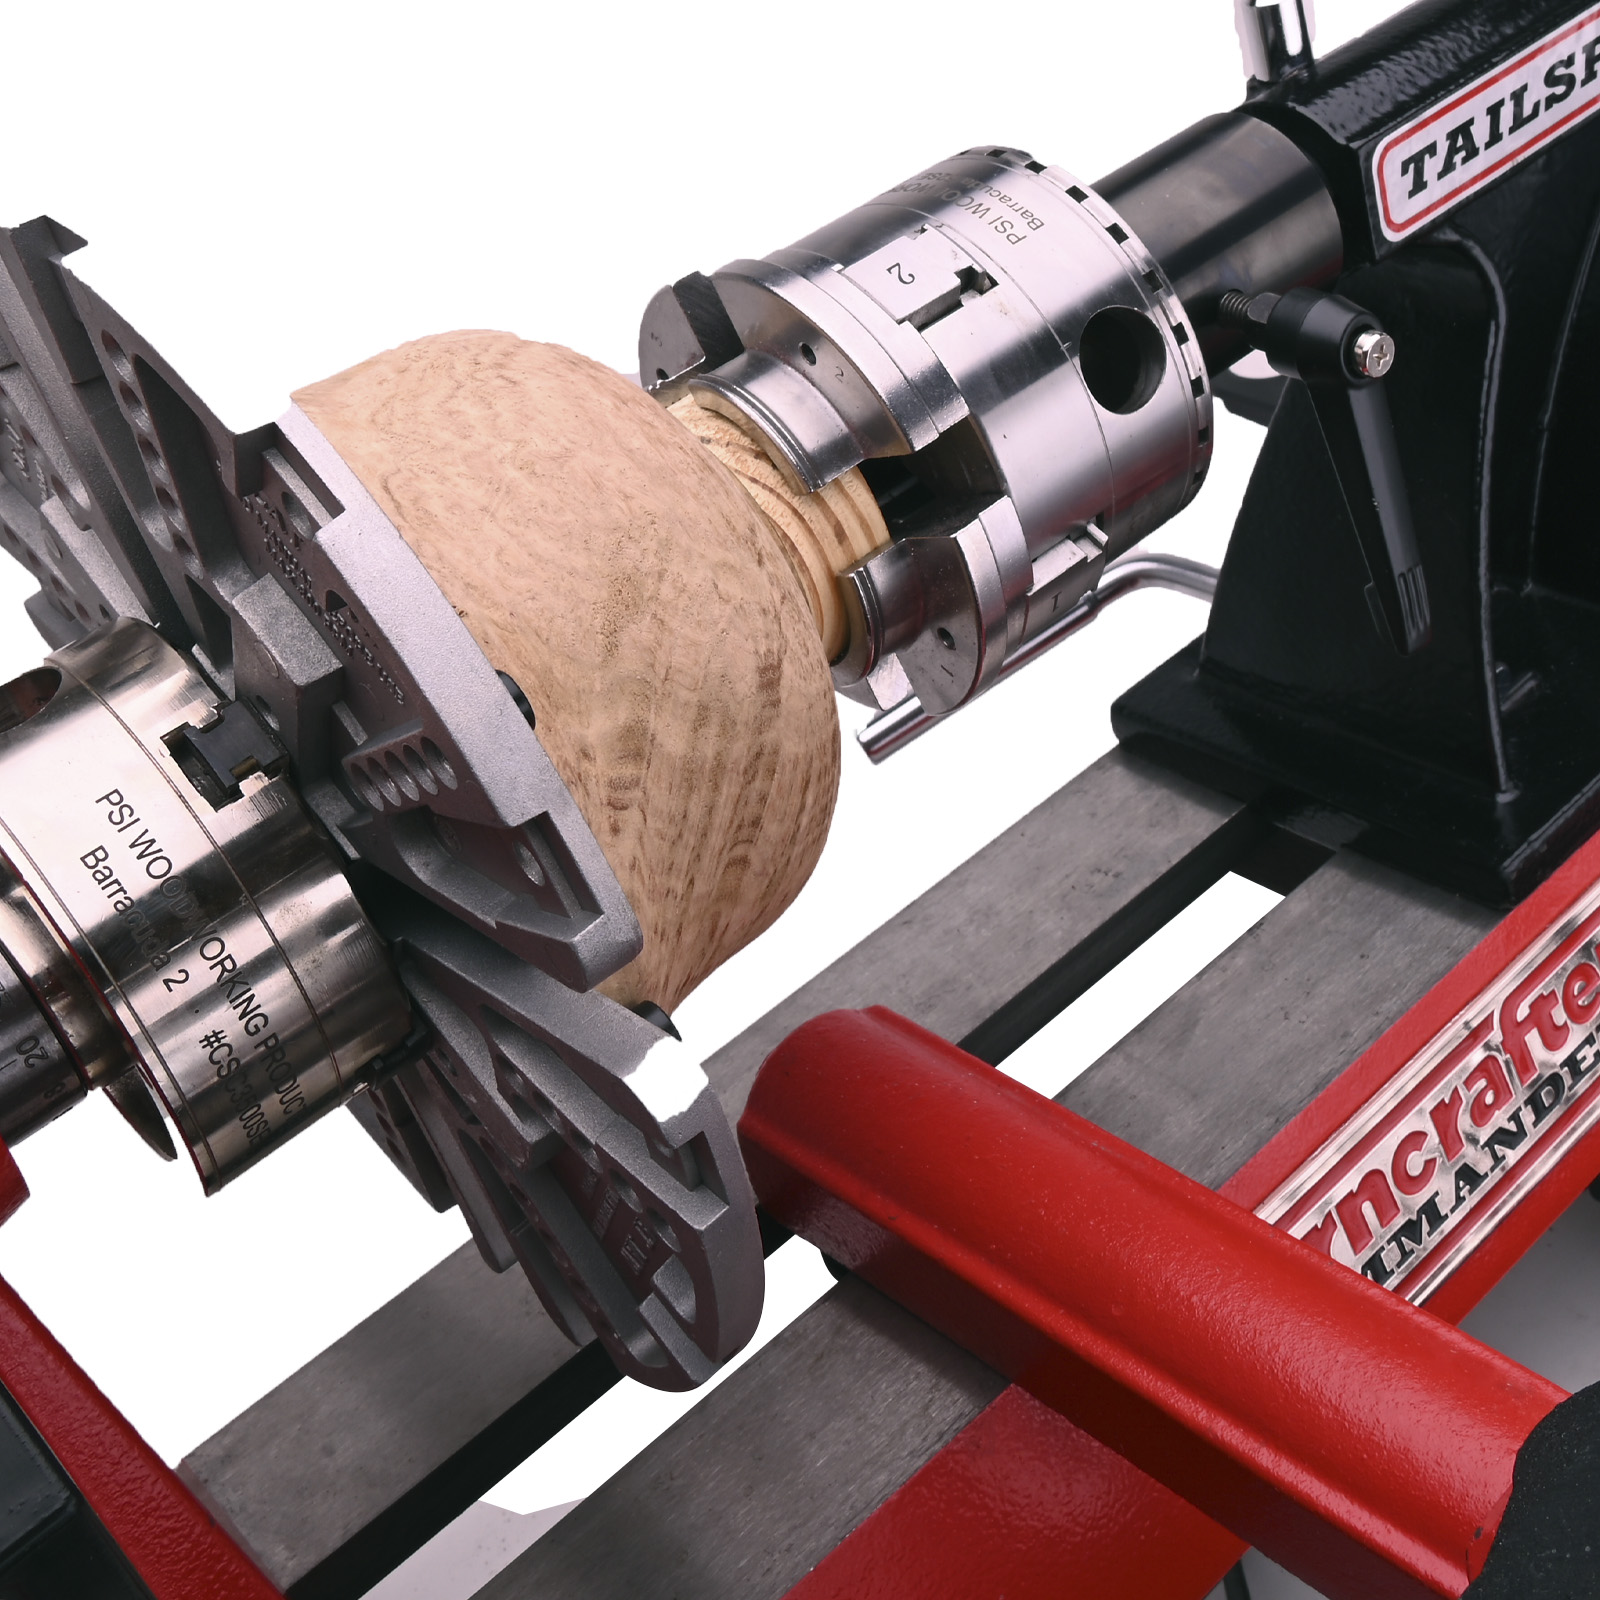 Penn State Industries Recalls Woodworking Jaw Chuck Systems Due to